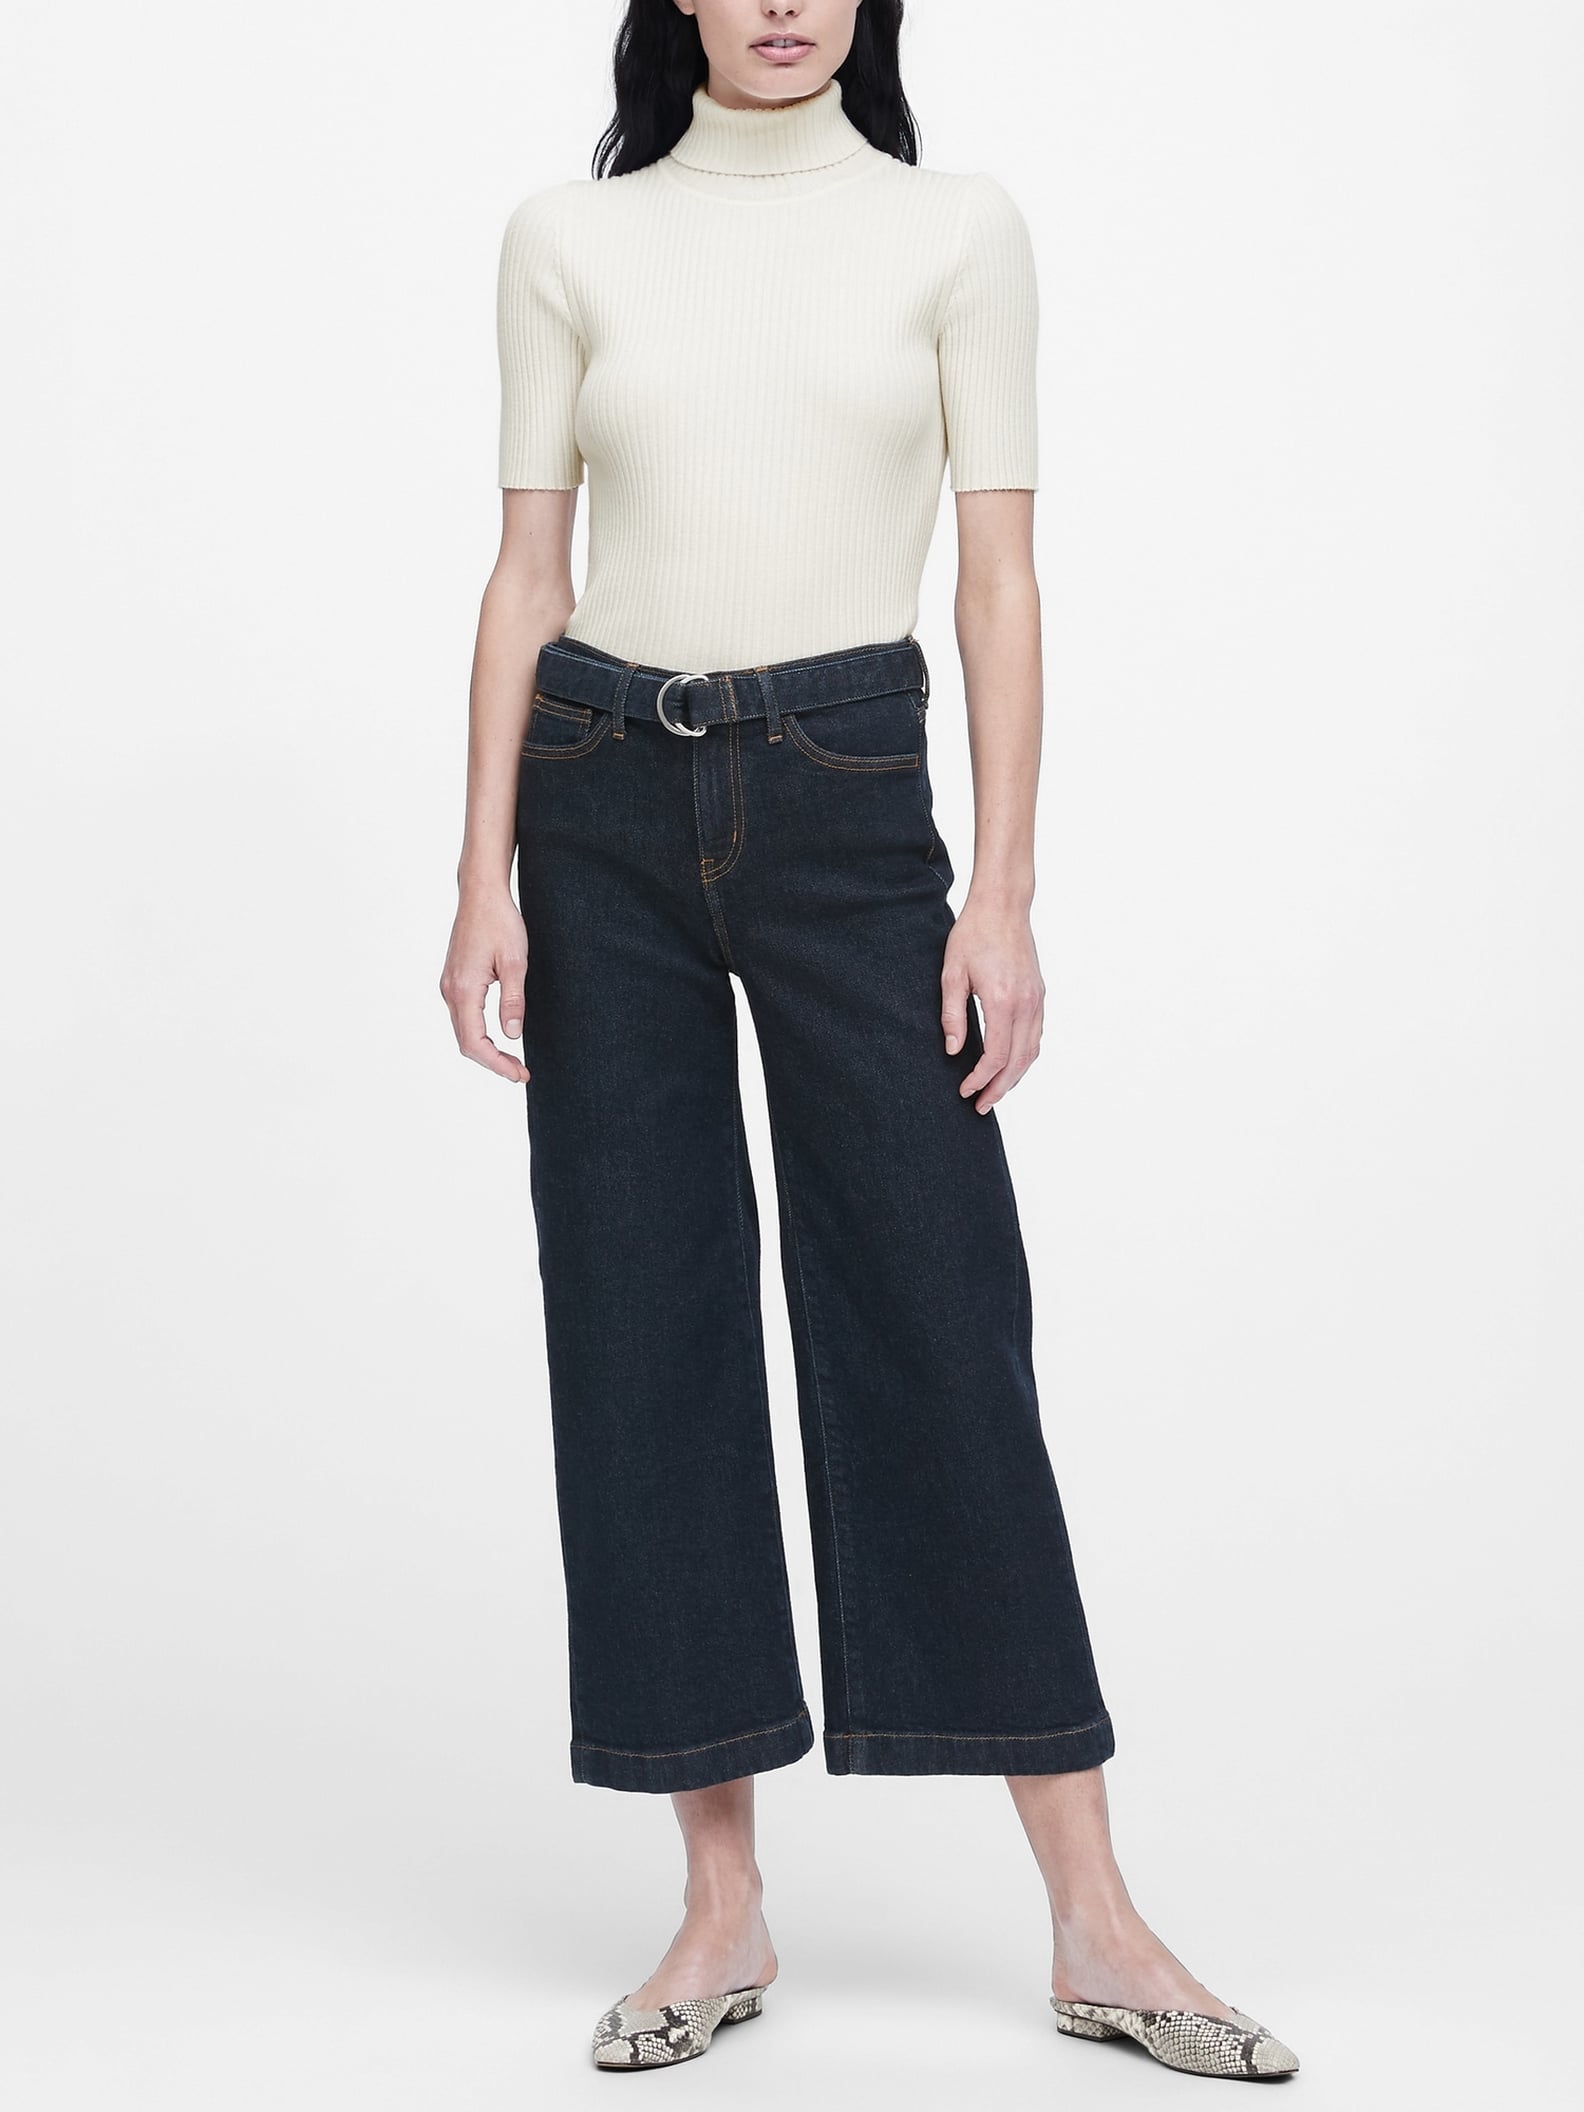 Affordable Stylish Work Clothes For Women at Banana Republic | POPSUGAR ...